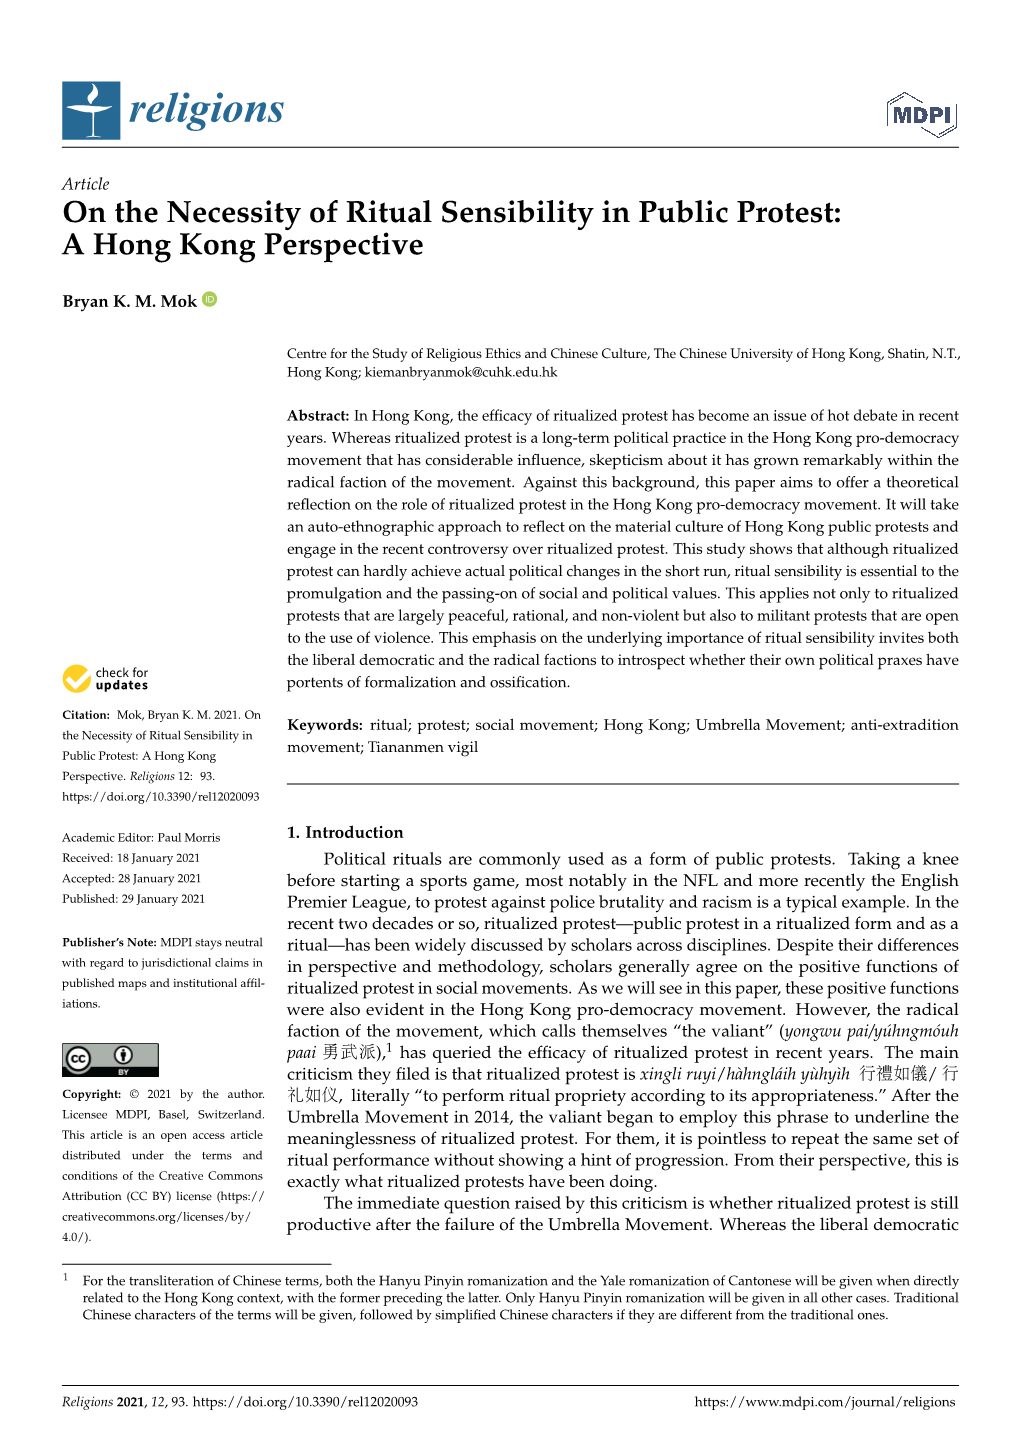 On the Necessity of Ritual Sensibility in Public Protest: a Hong Kong Perspective